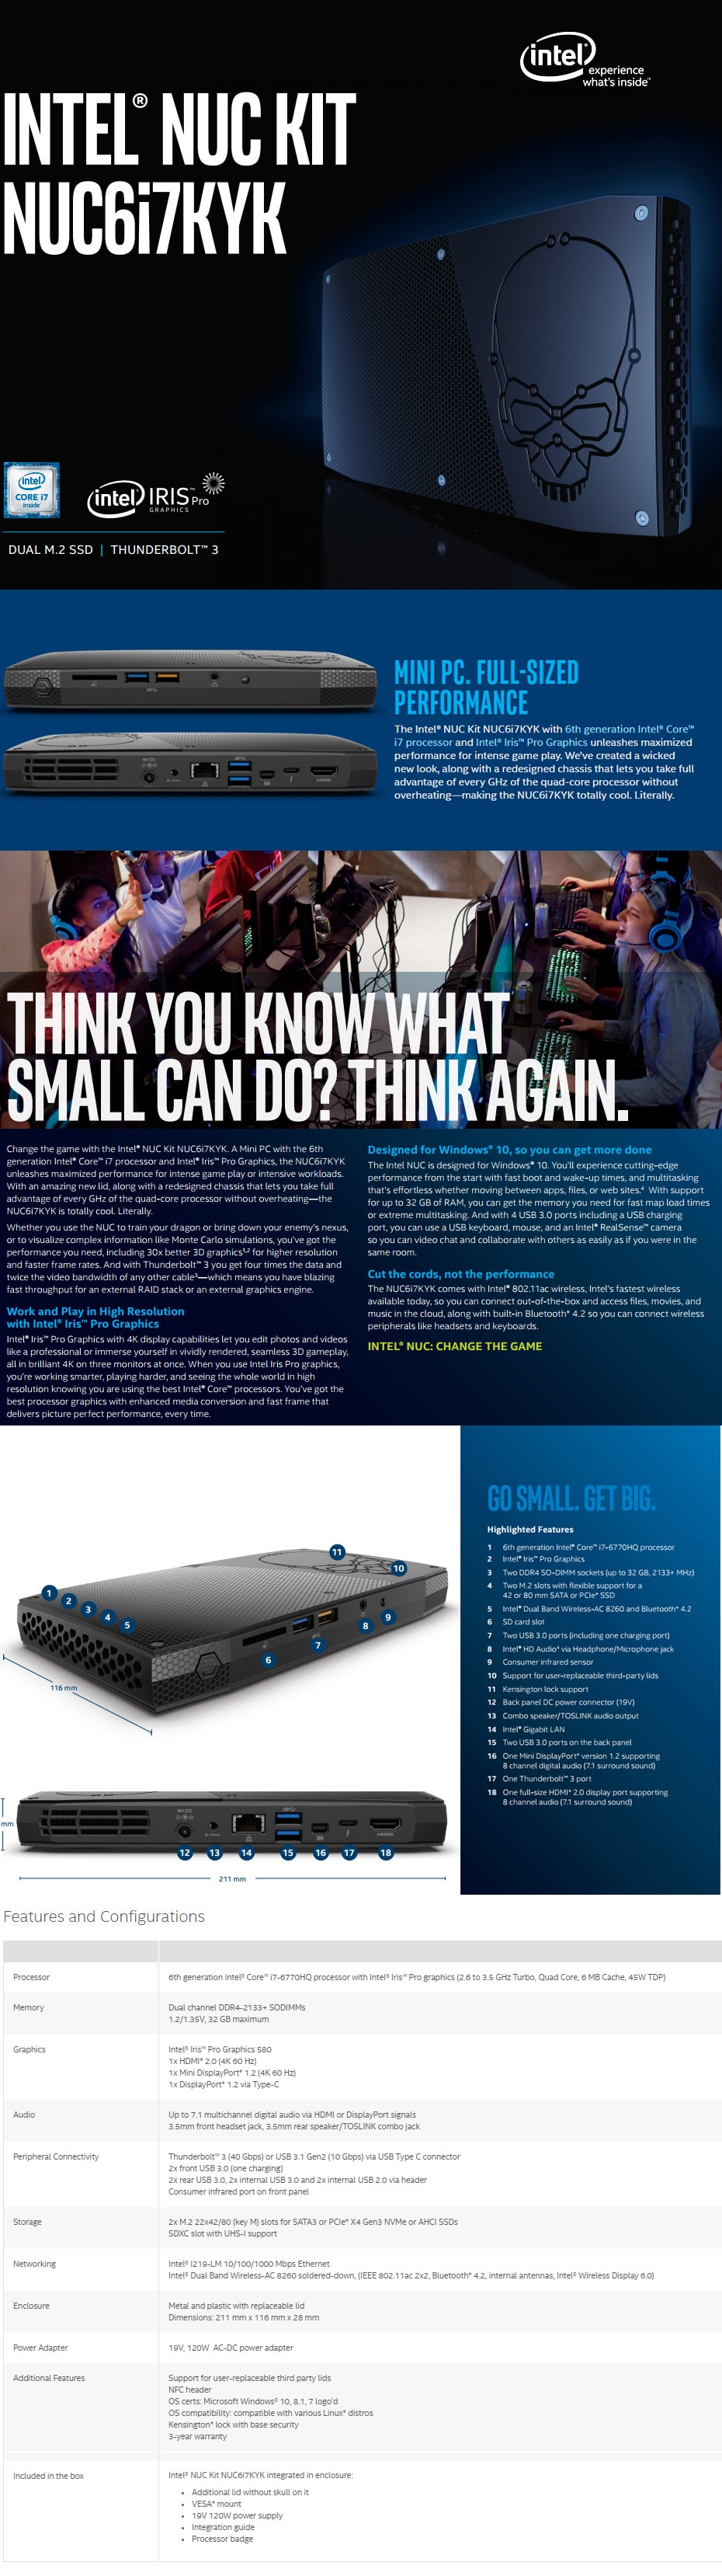 Intel i7 6th Generation NUC Kit features